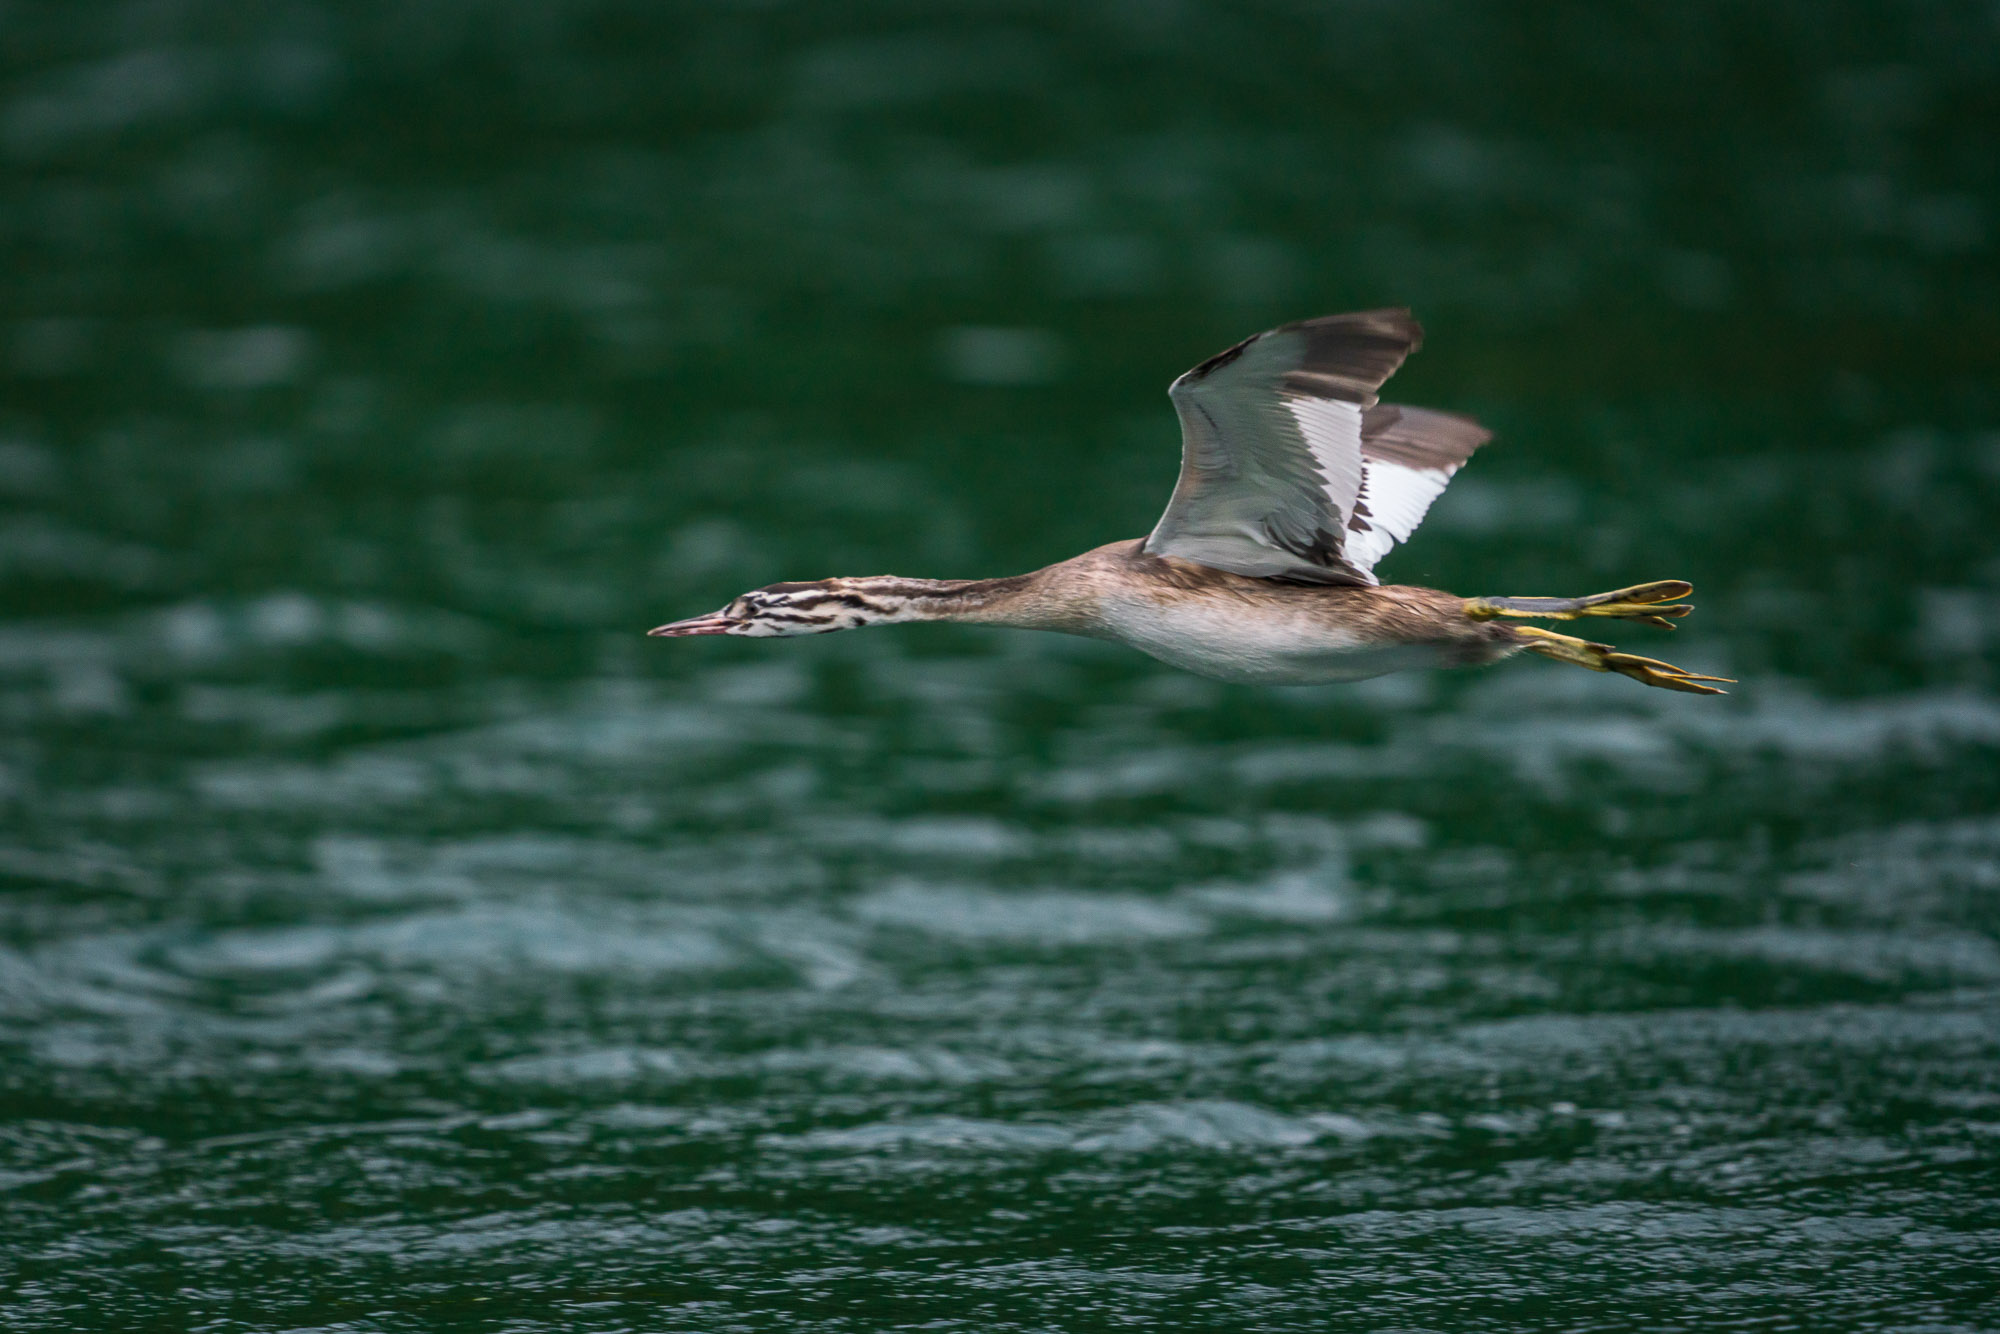 Young Great Crested Grebe learning flight...